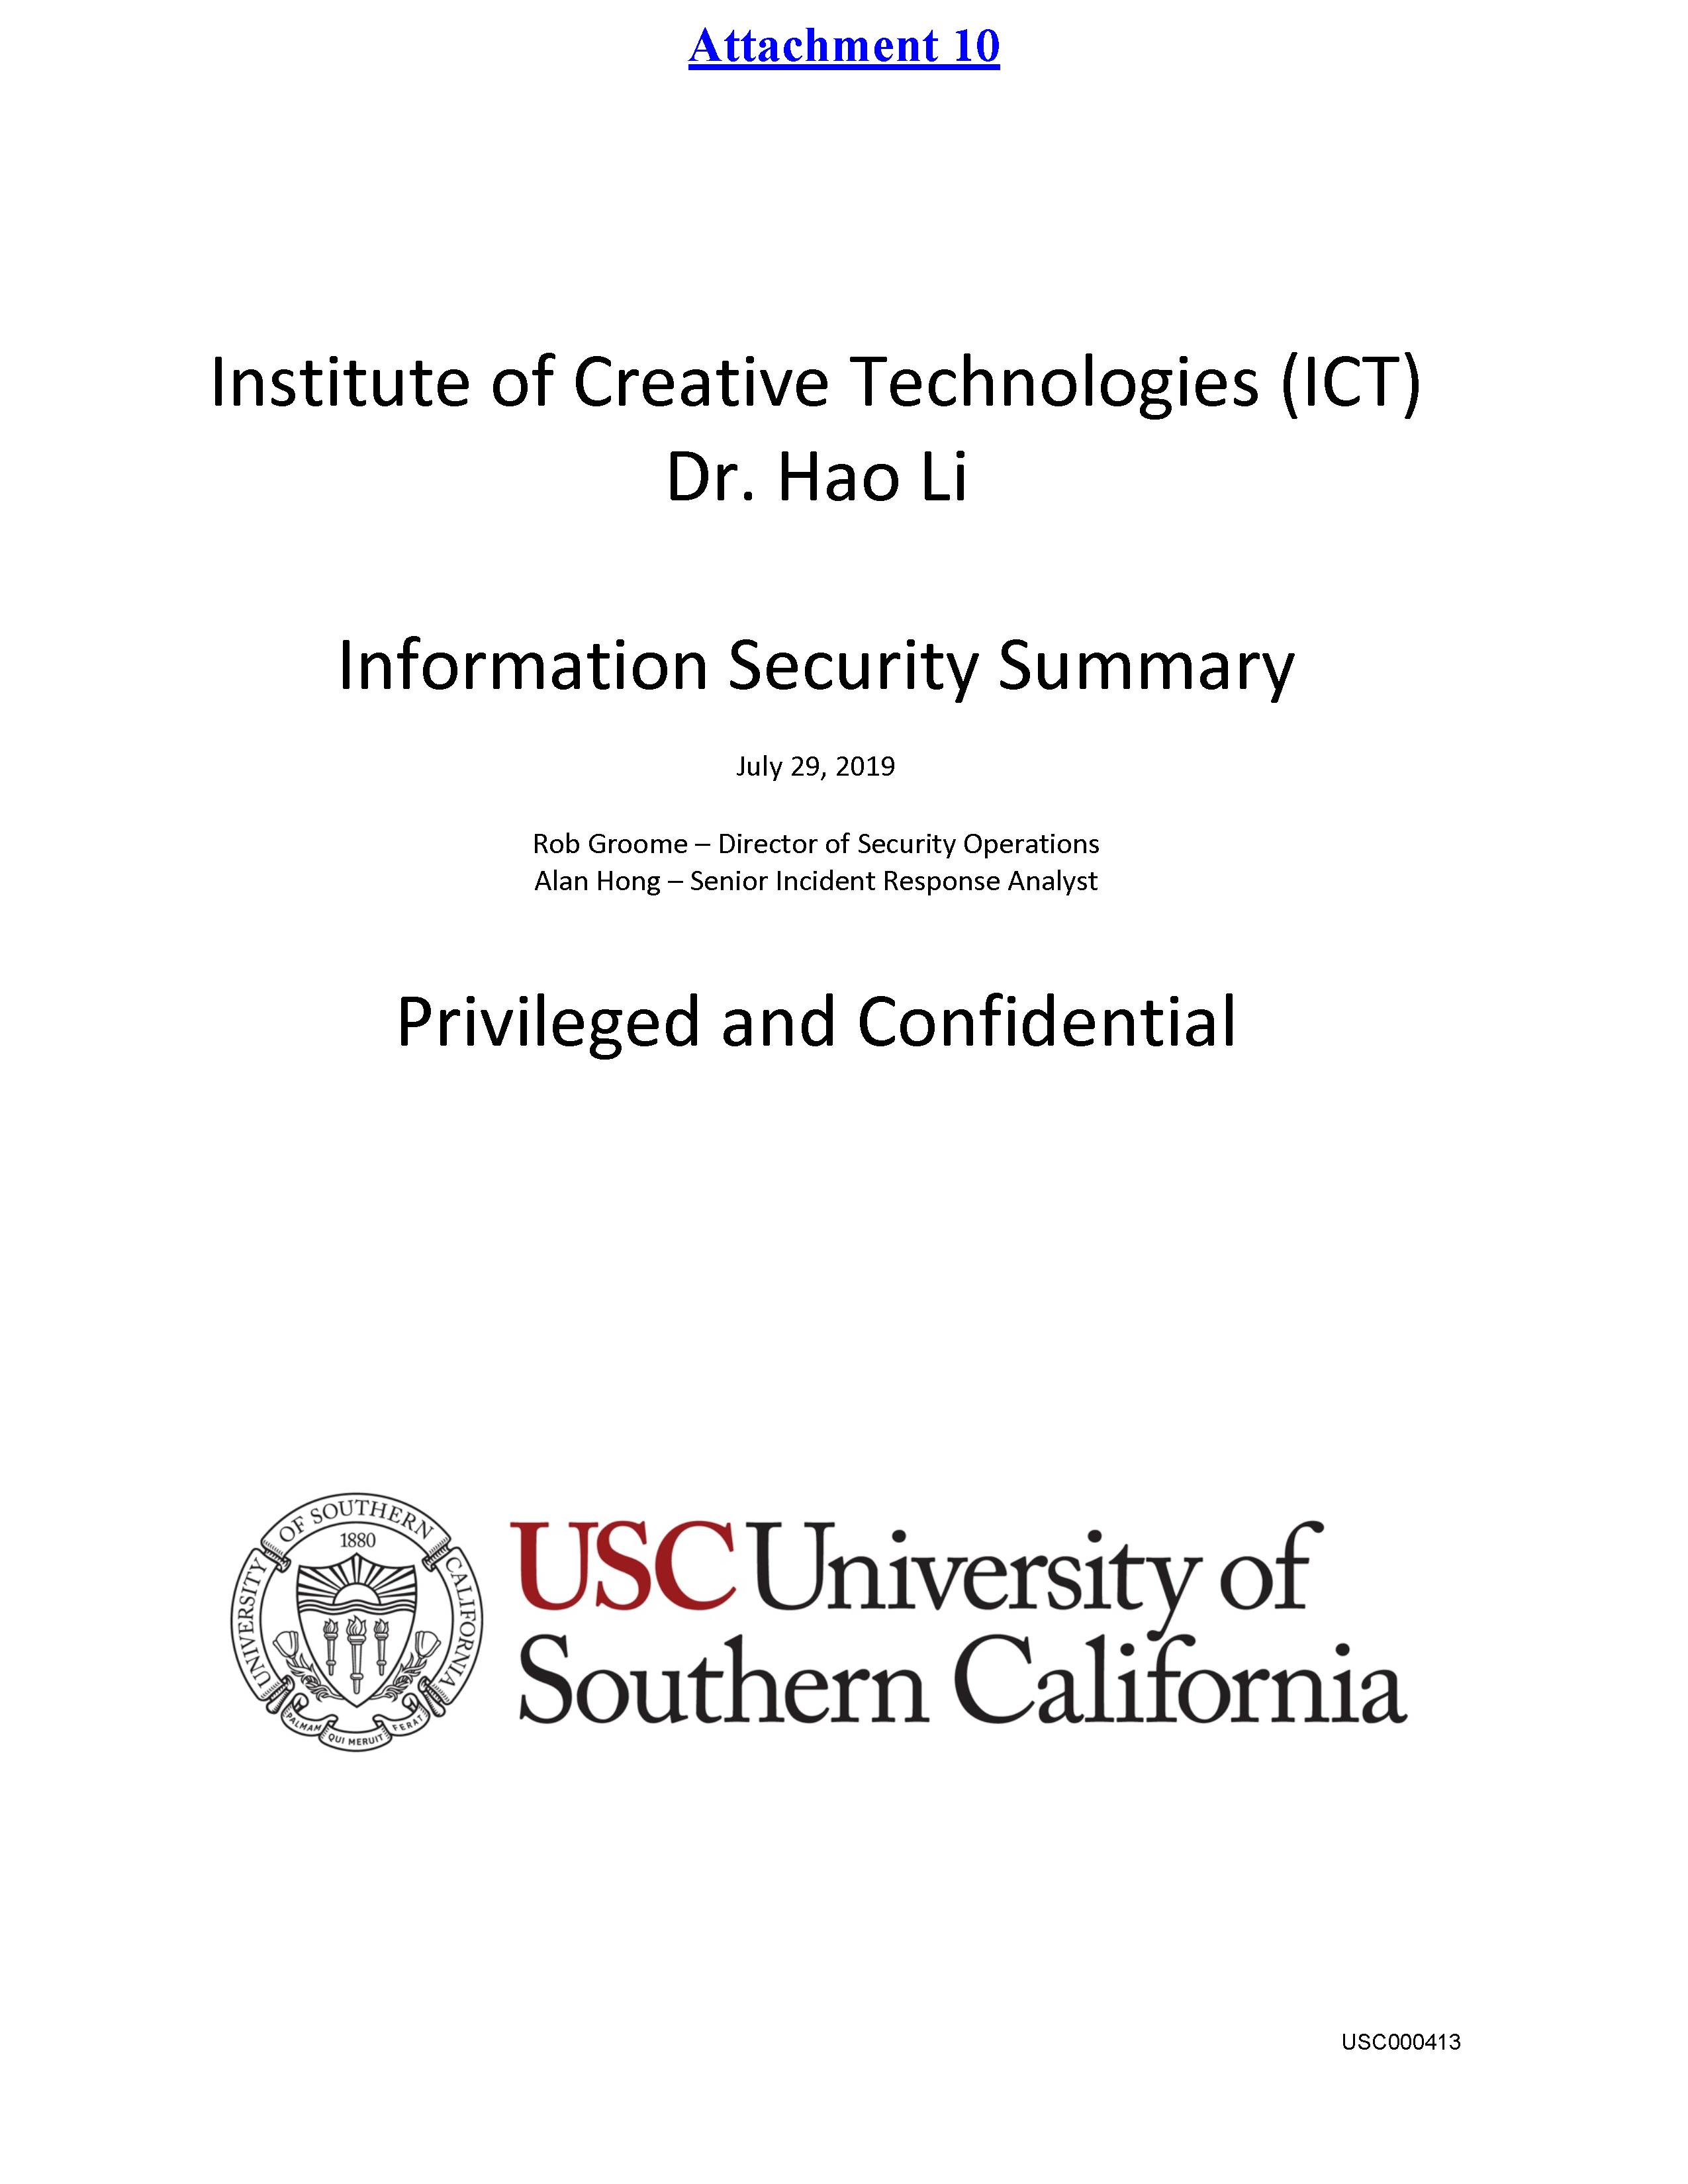 USC's Investigation Report re Hao Li's and Pinscreen's Scientific Misconduct at ACM SIGGRAPH RTL 2017 [Summary] Page 61